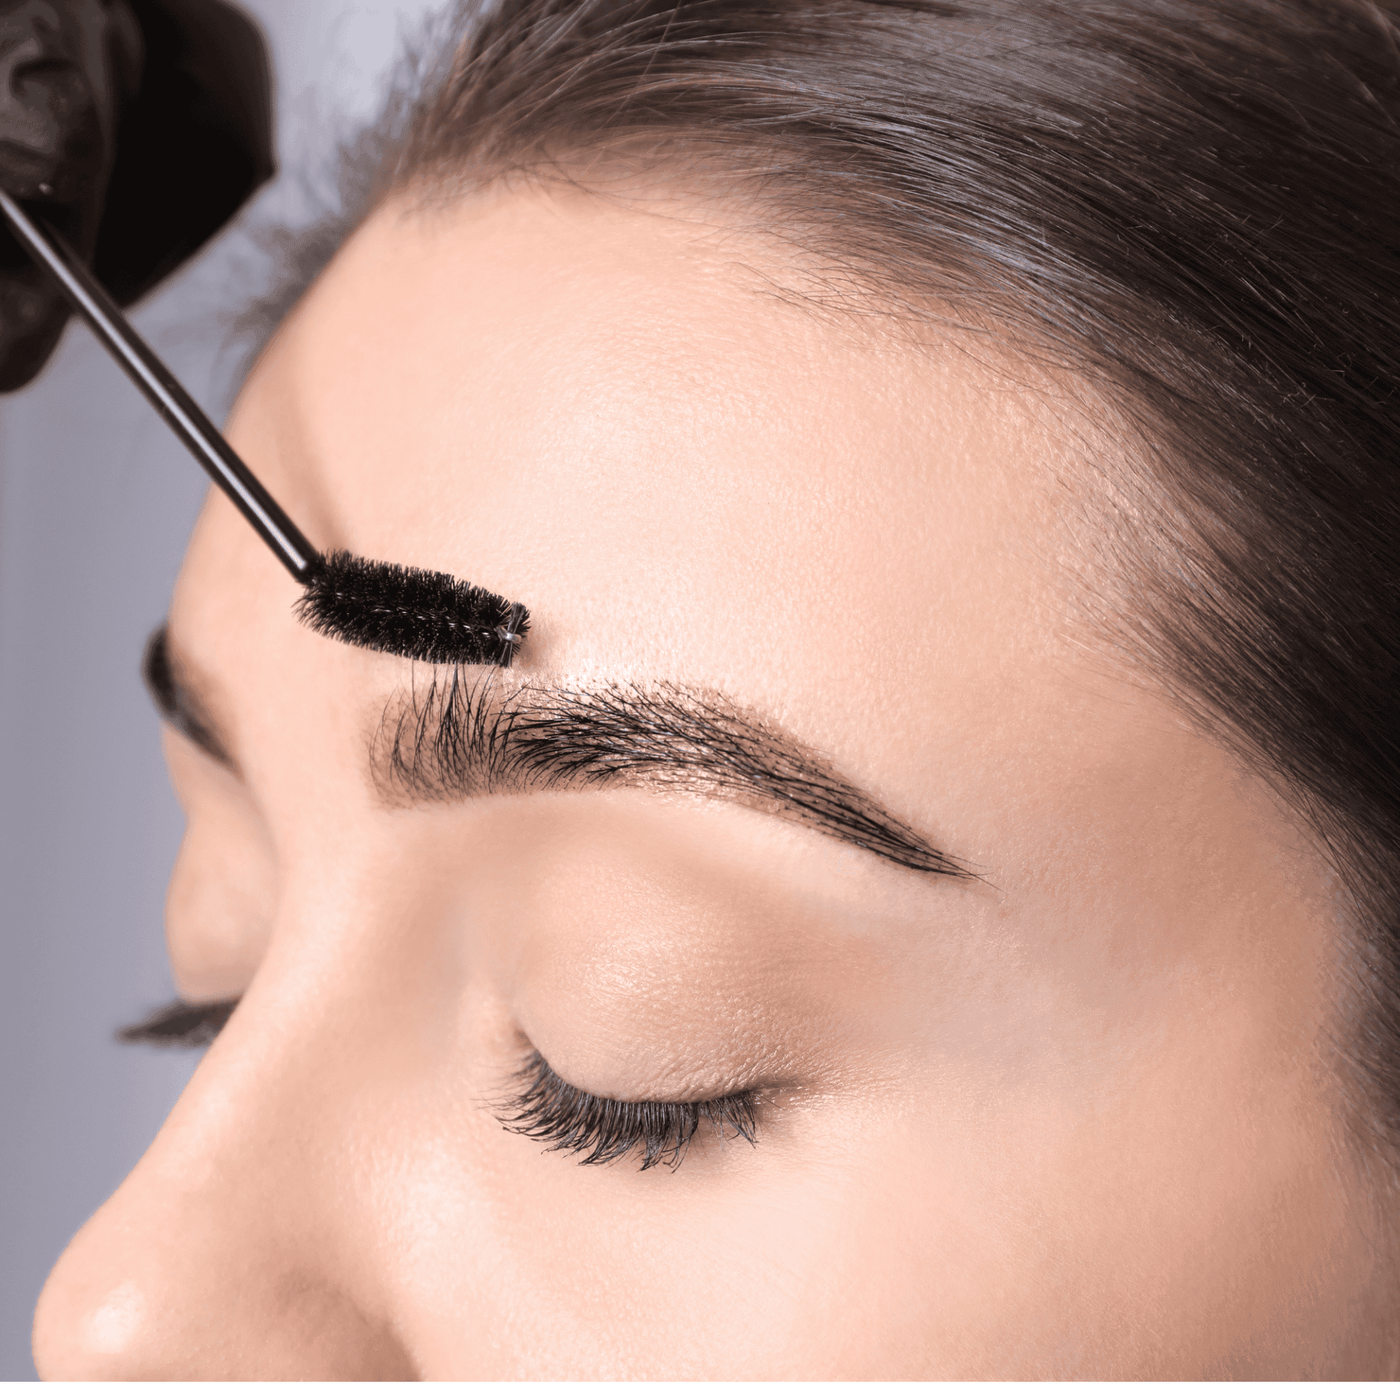 Eyebrow Shaping, Tinting and Waxing Course - The London Brow Company